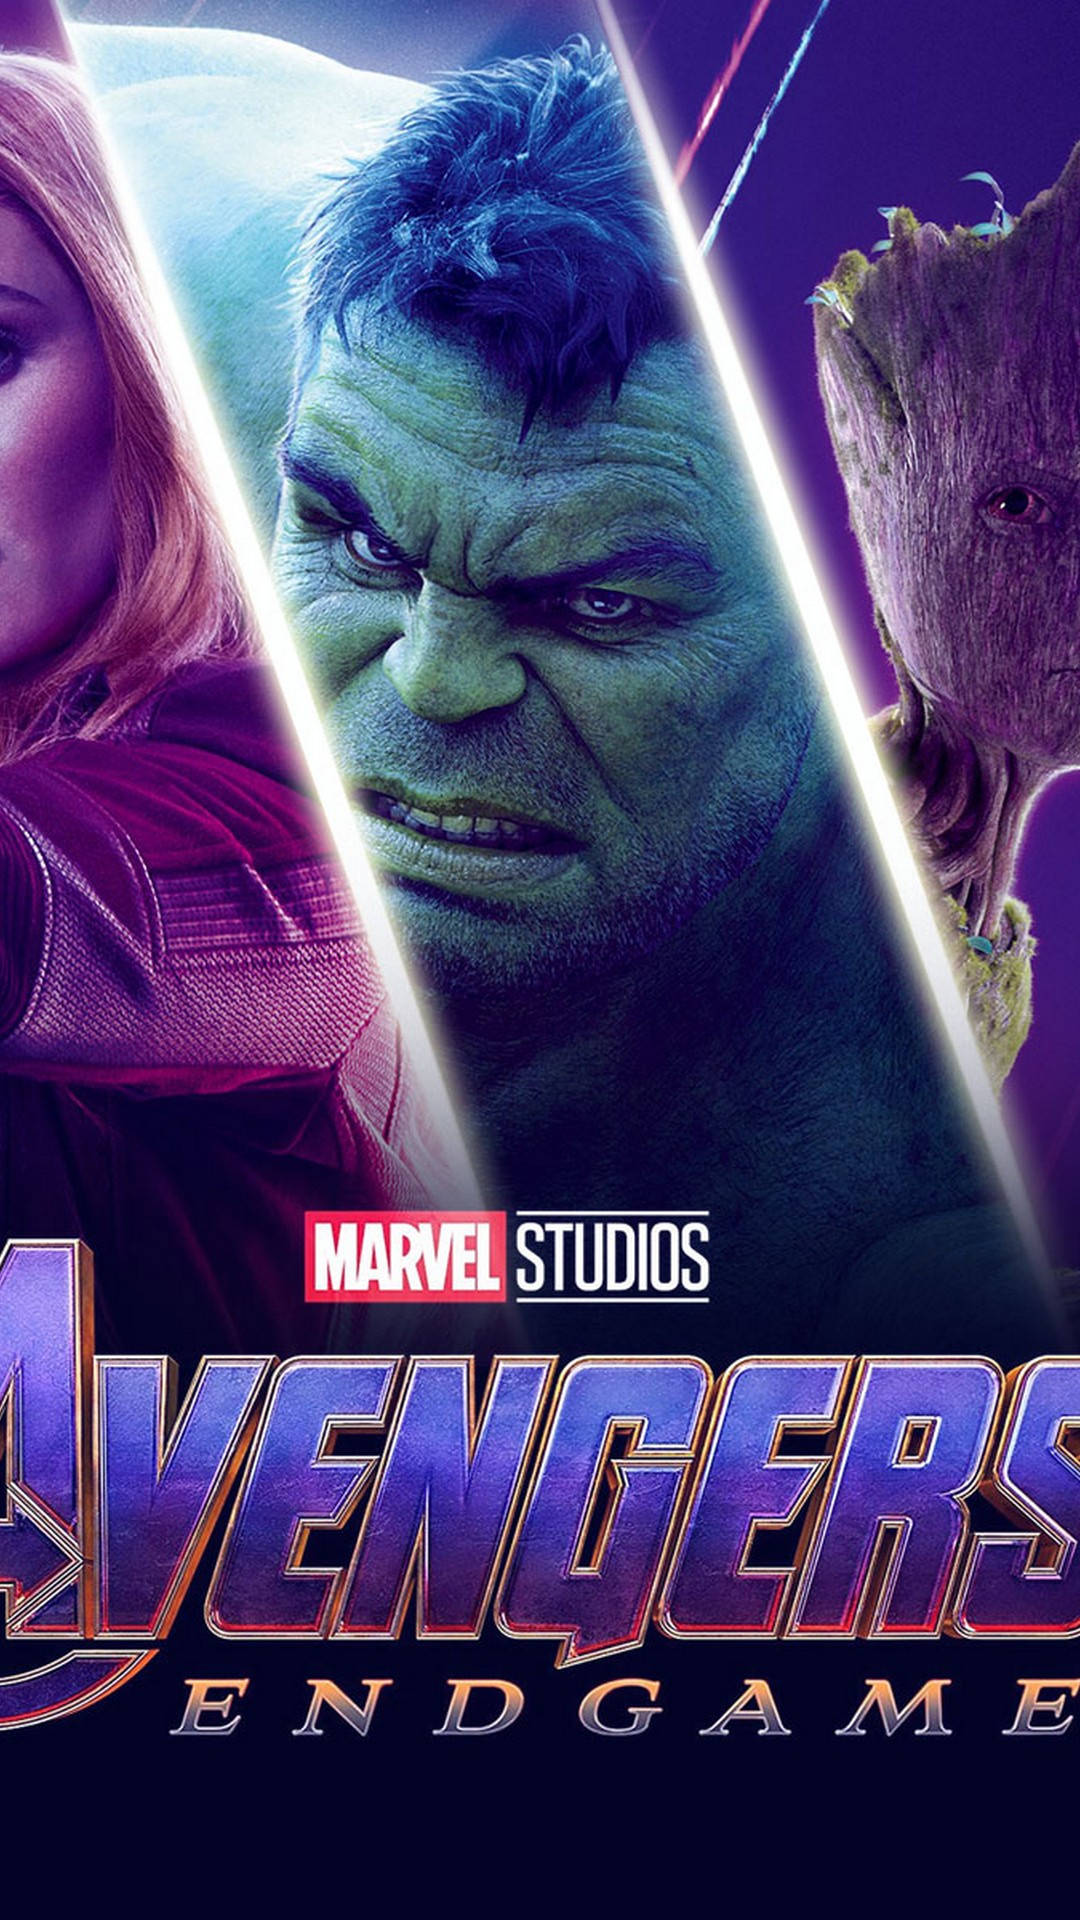 The Avengers Unite in Marvel's Epic Finale, 